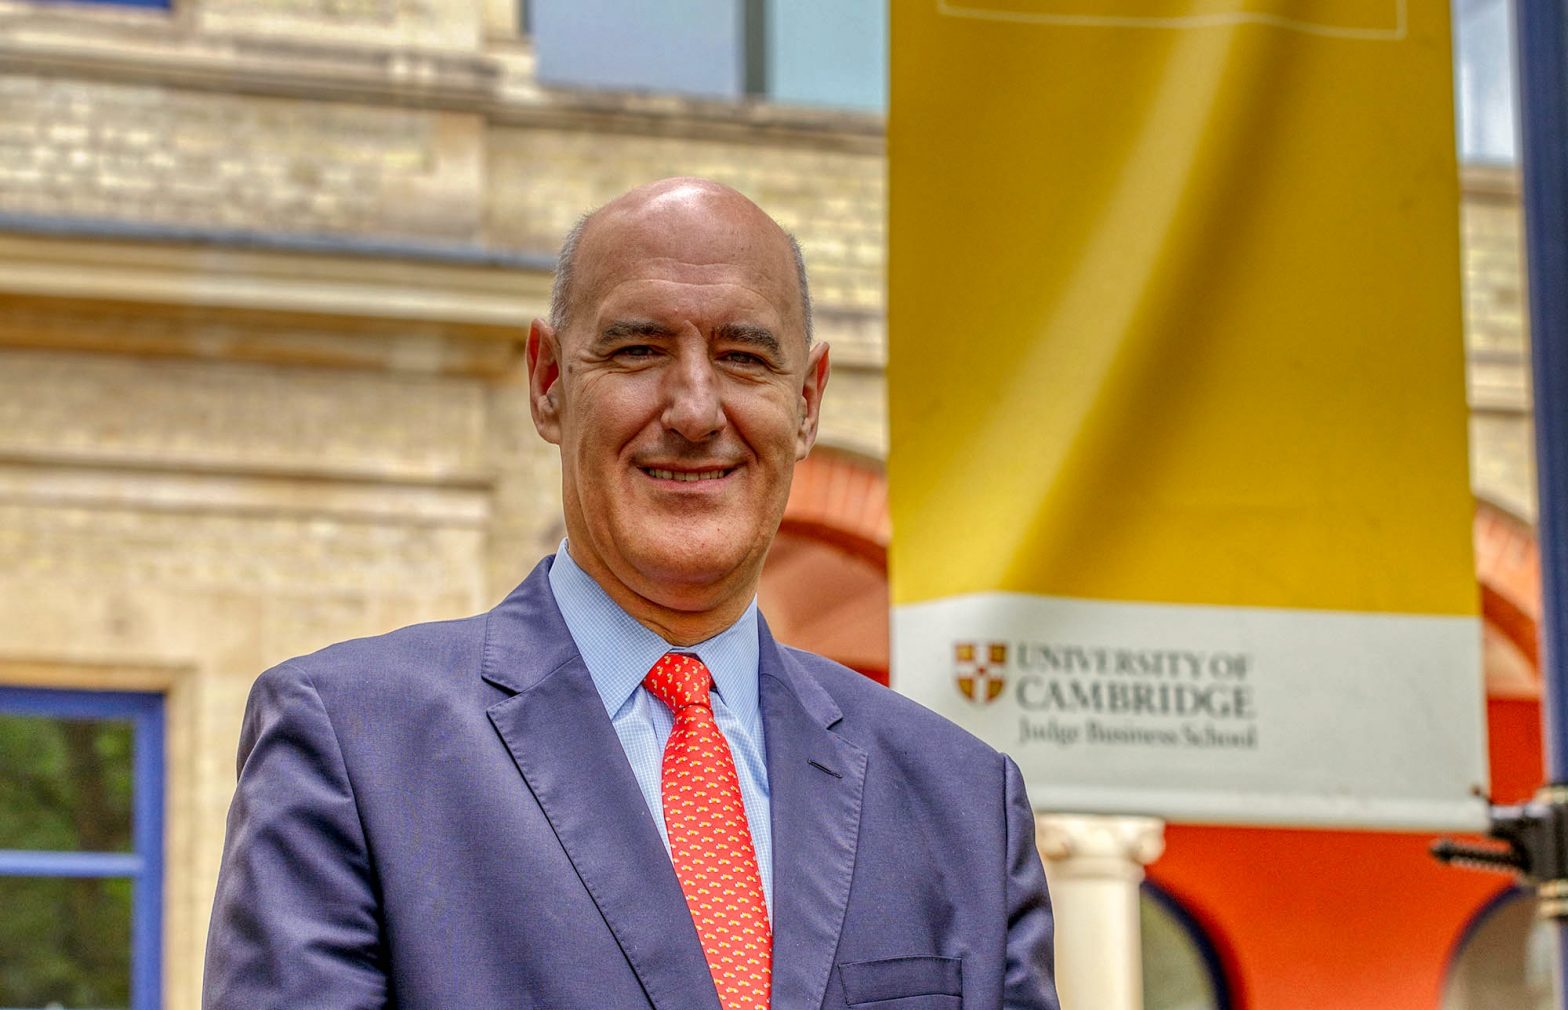 Professor Mauro Guillén, Dean of the Cambridge Judge Business School (11 February 2022)- “How today’s biggest trends will collide and reshape the future of everything”